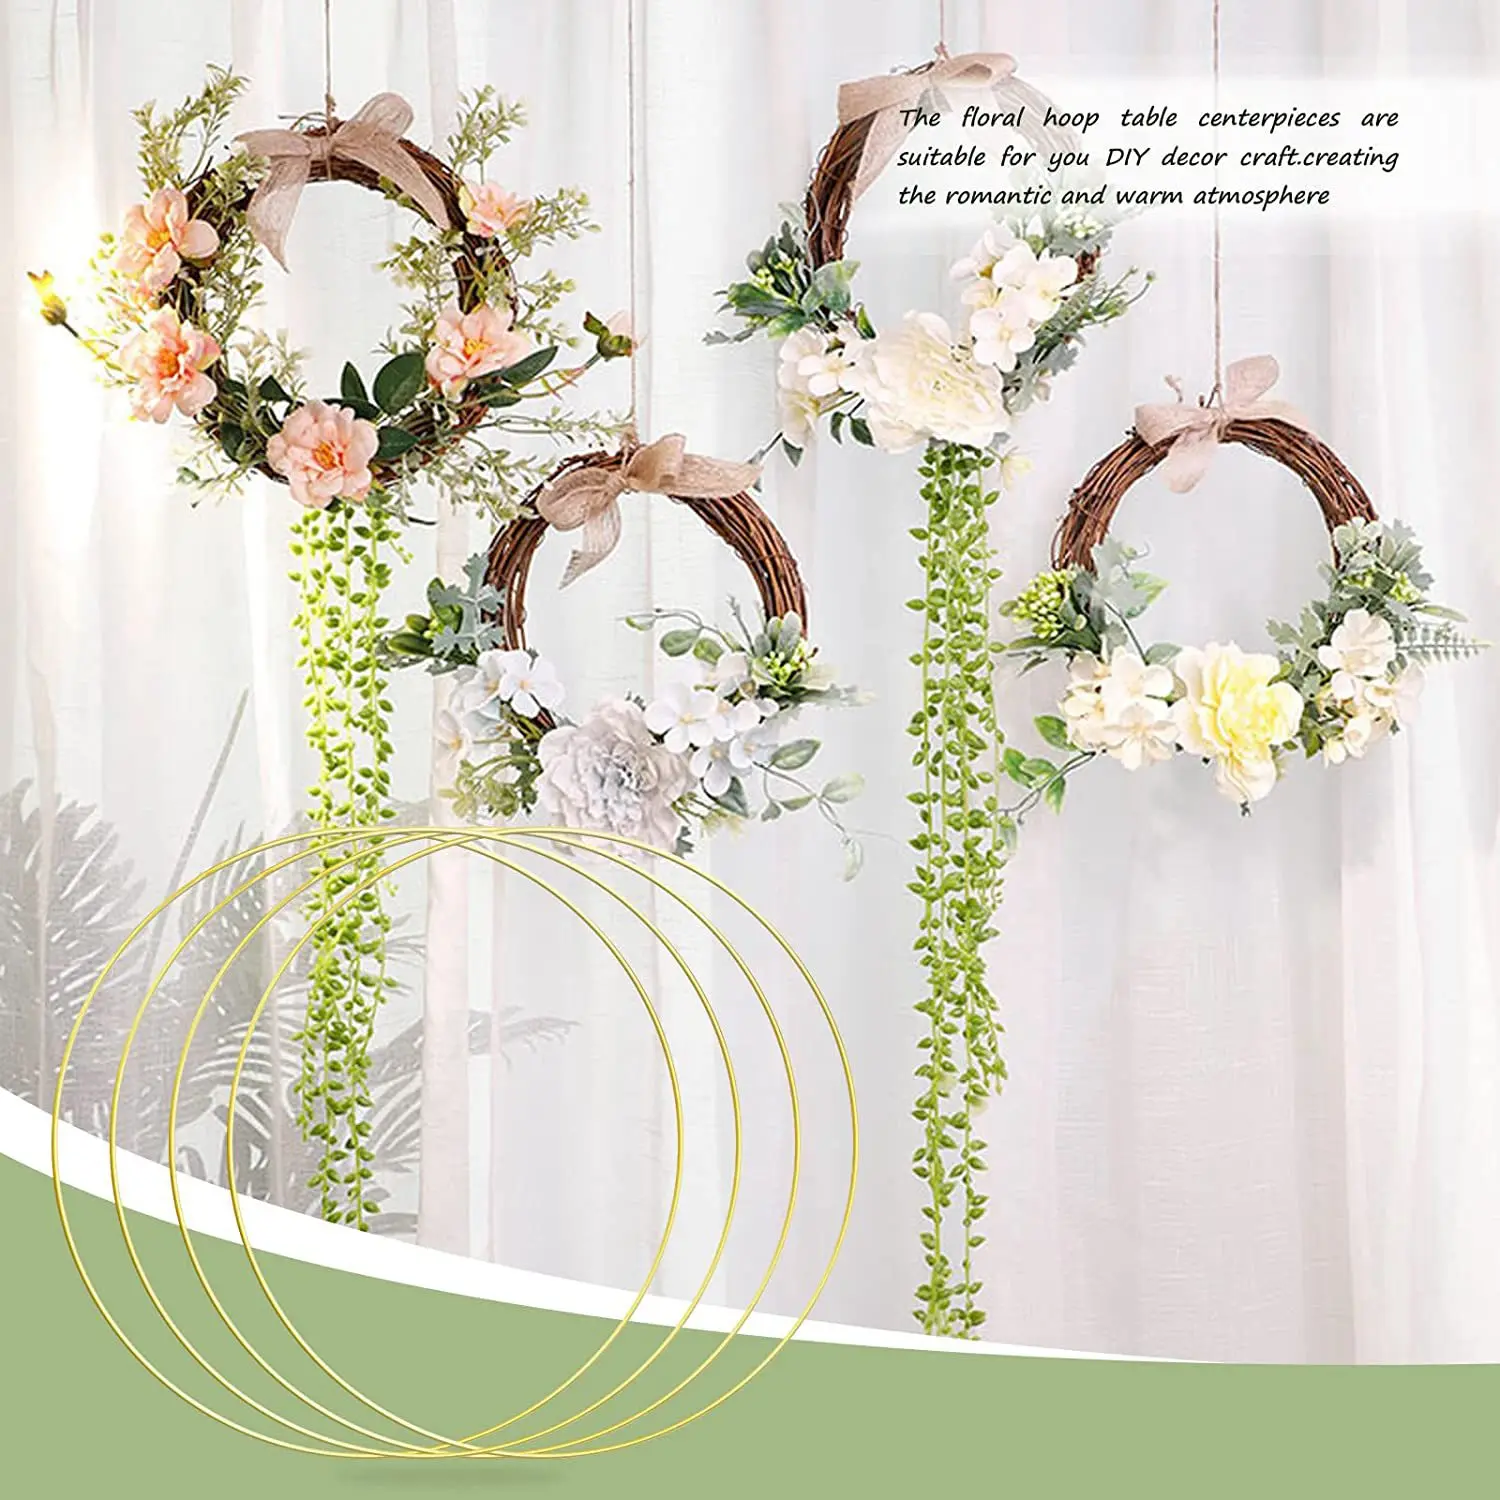 

4 PCS 12 Inch Metal Floral Hoop Centerpiece for Table, Metal Wreath Ring with 4 PCS Wood Place Card Holders for DIY